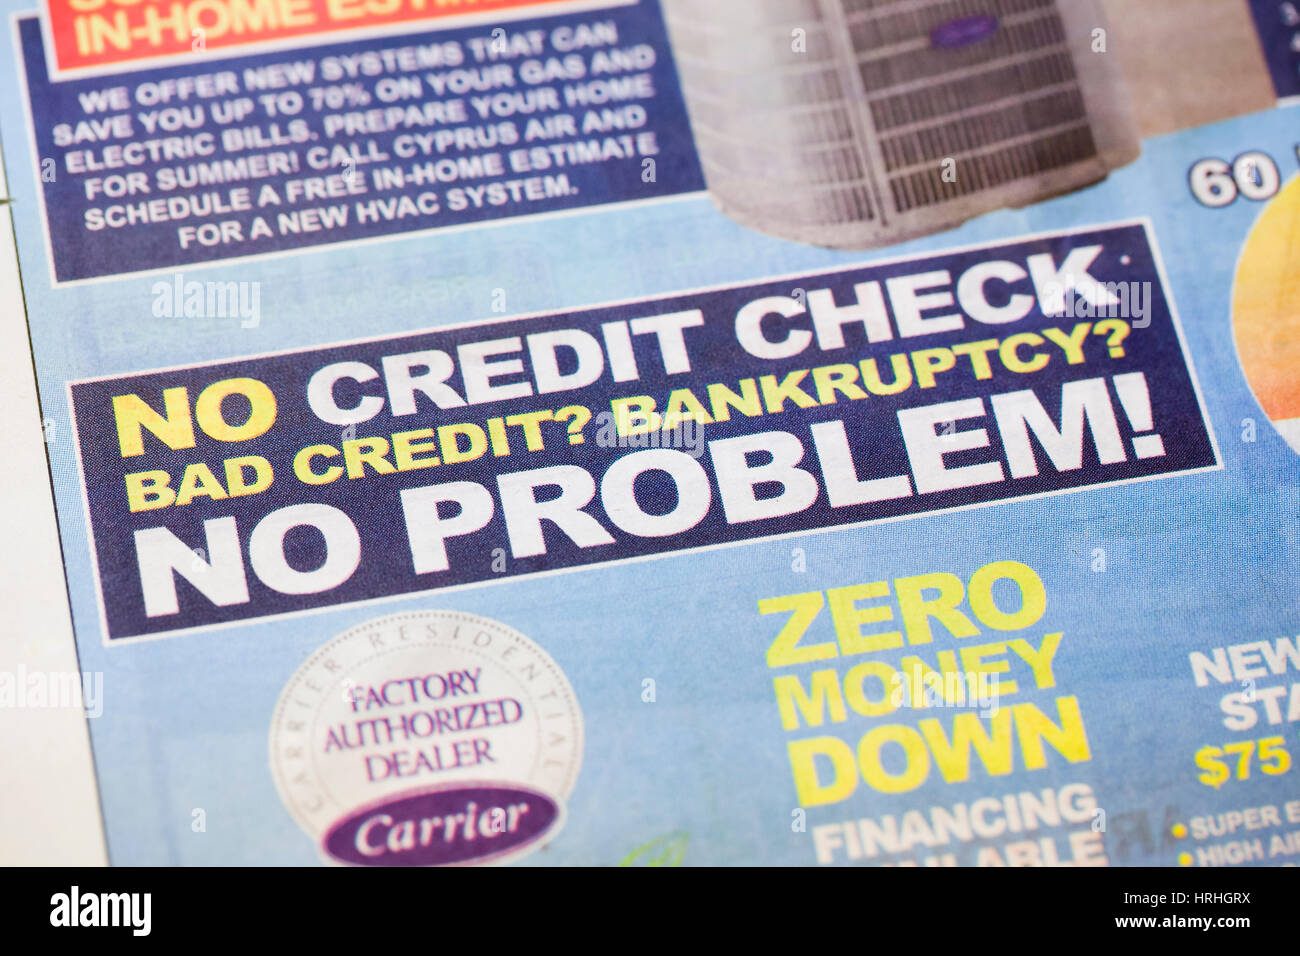 No Credit Check, Bad Credit, Bankruptcy, No Problem message in print ad for HVAC system - USA Stock Photo